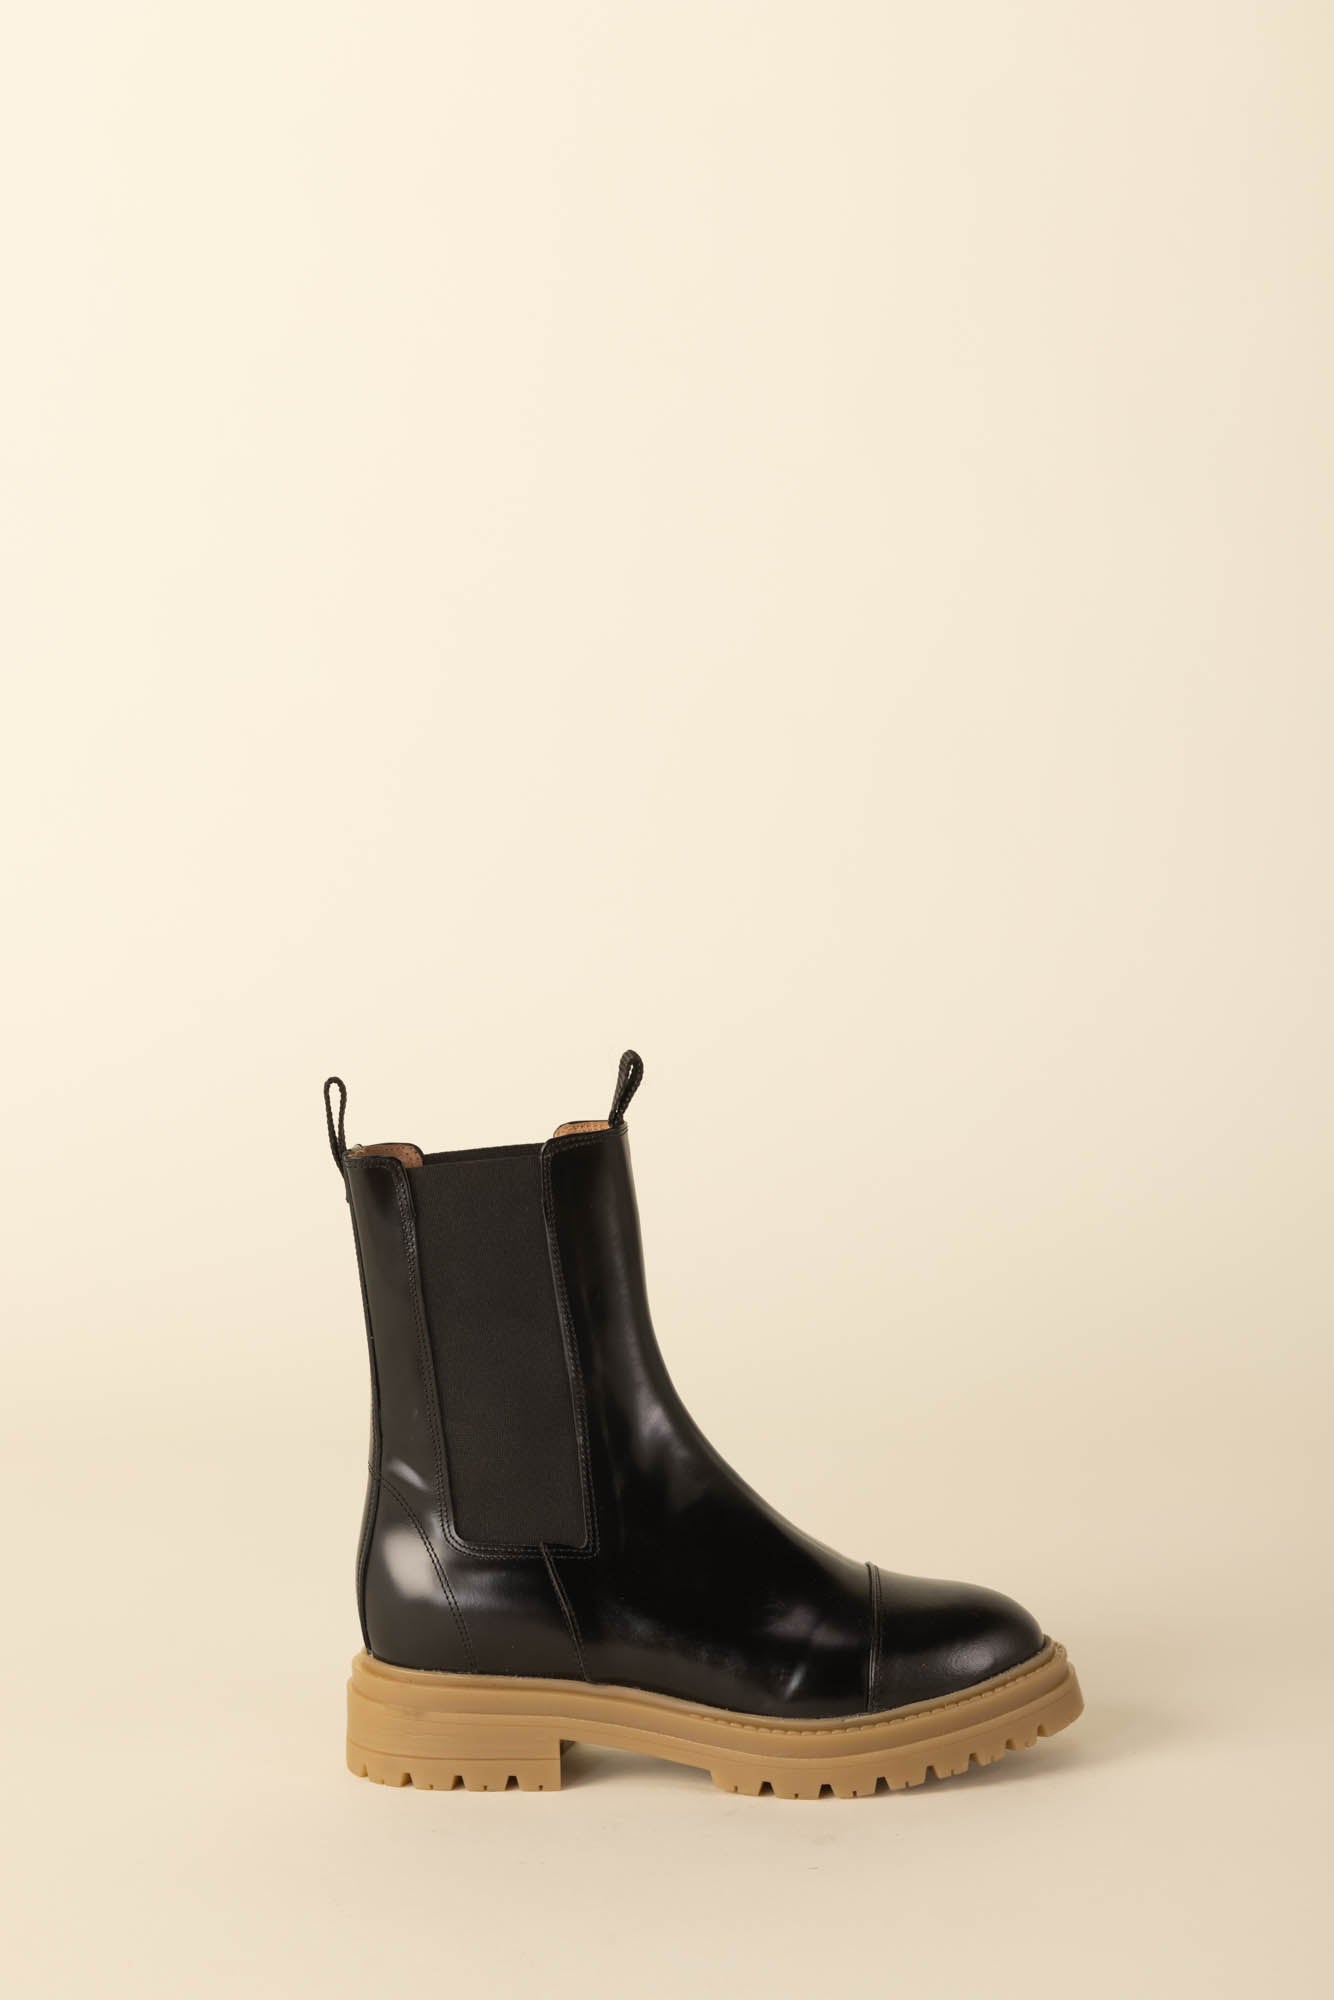 Fleuron iced black ankle boots